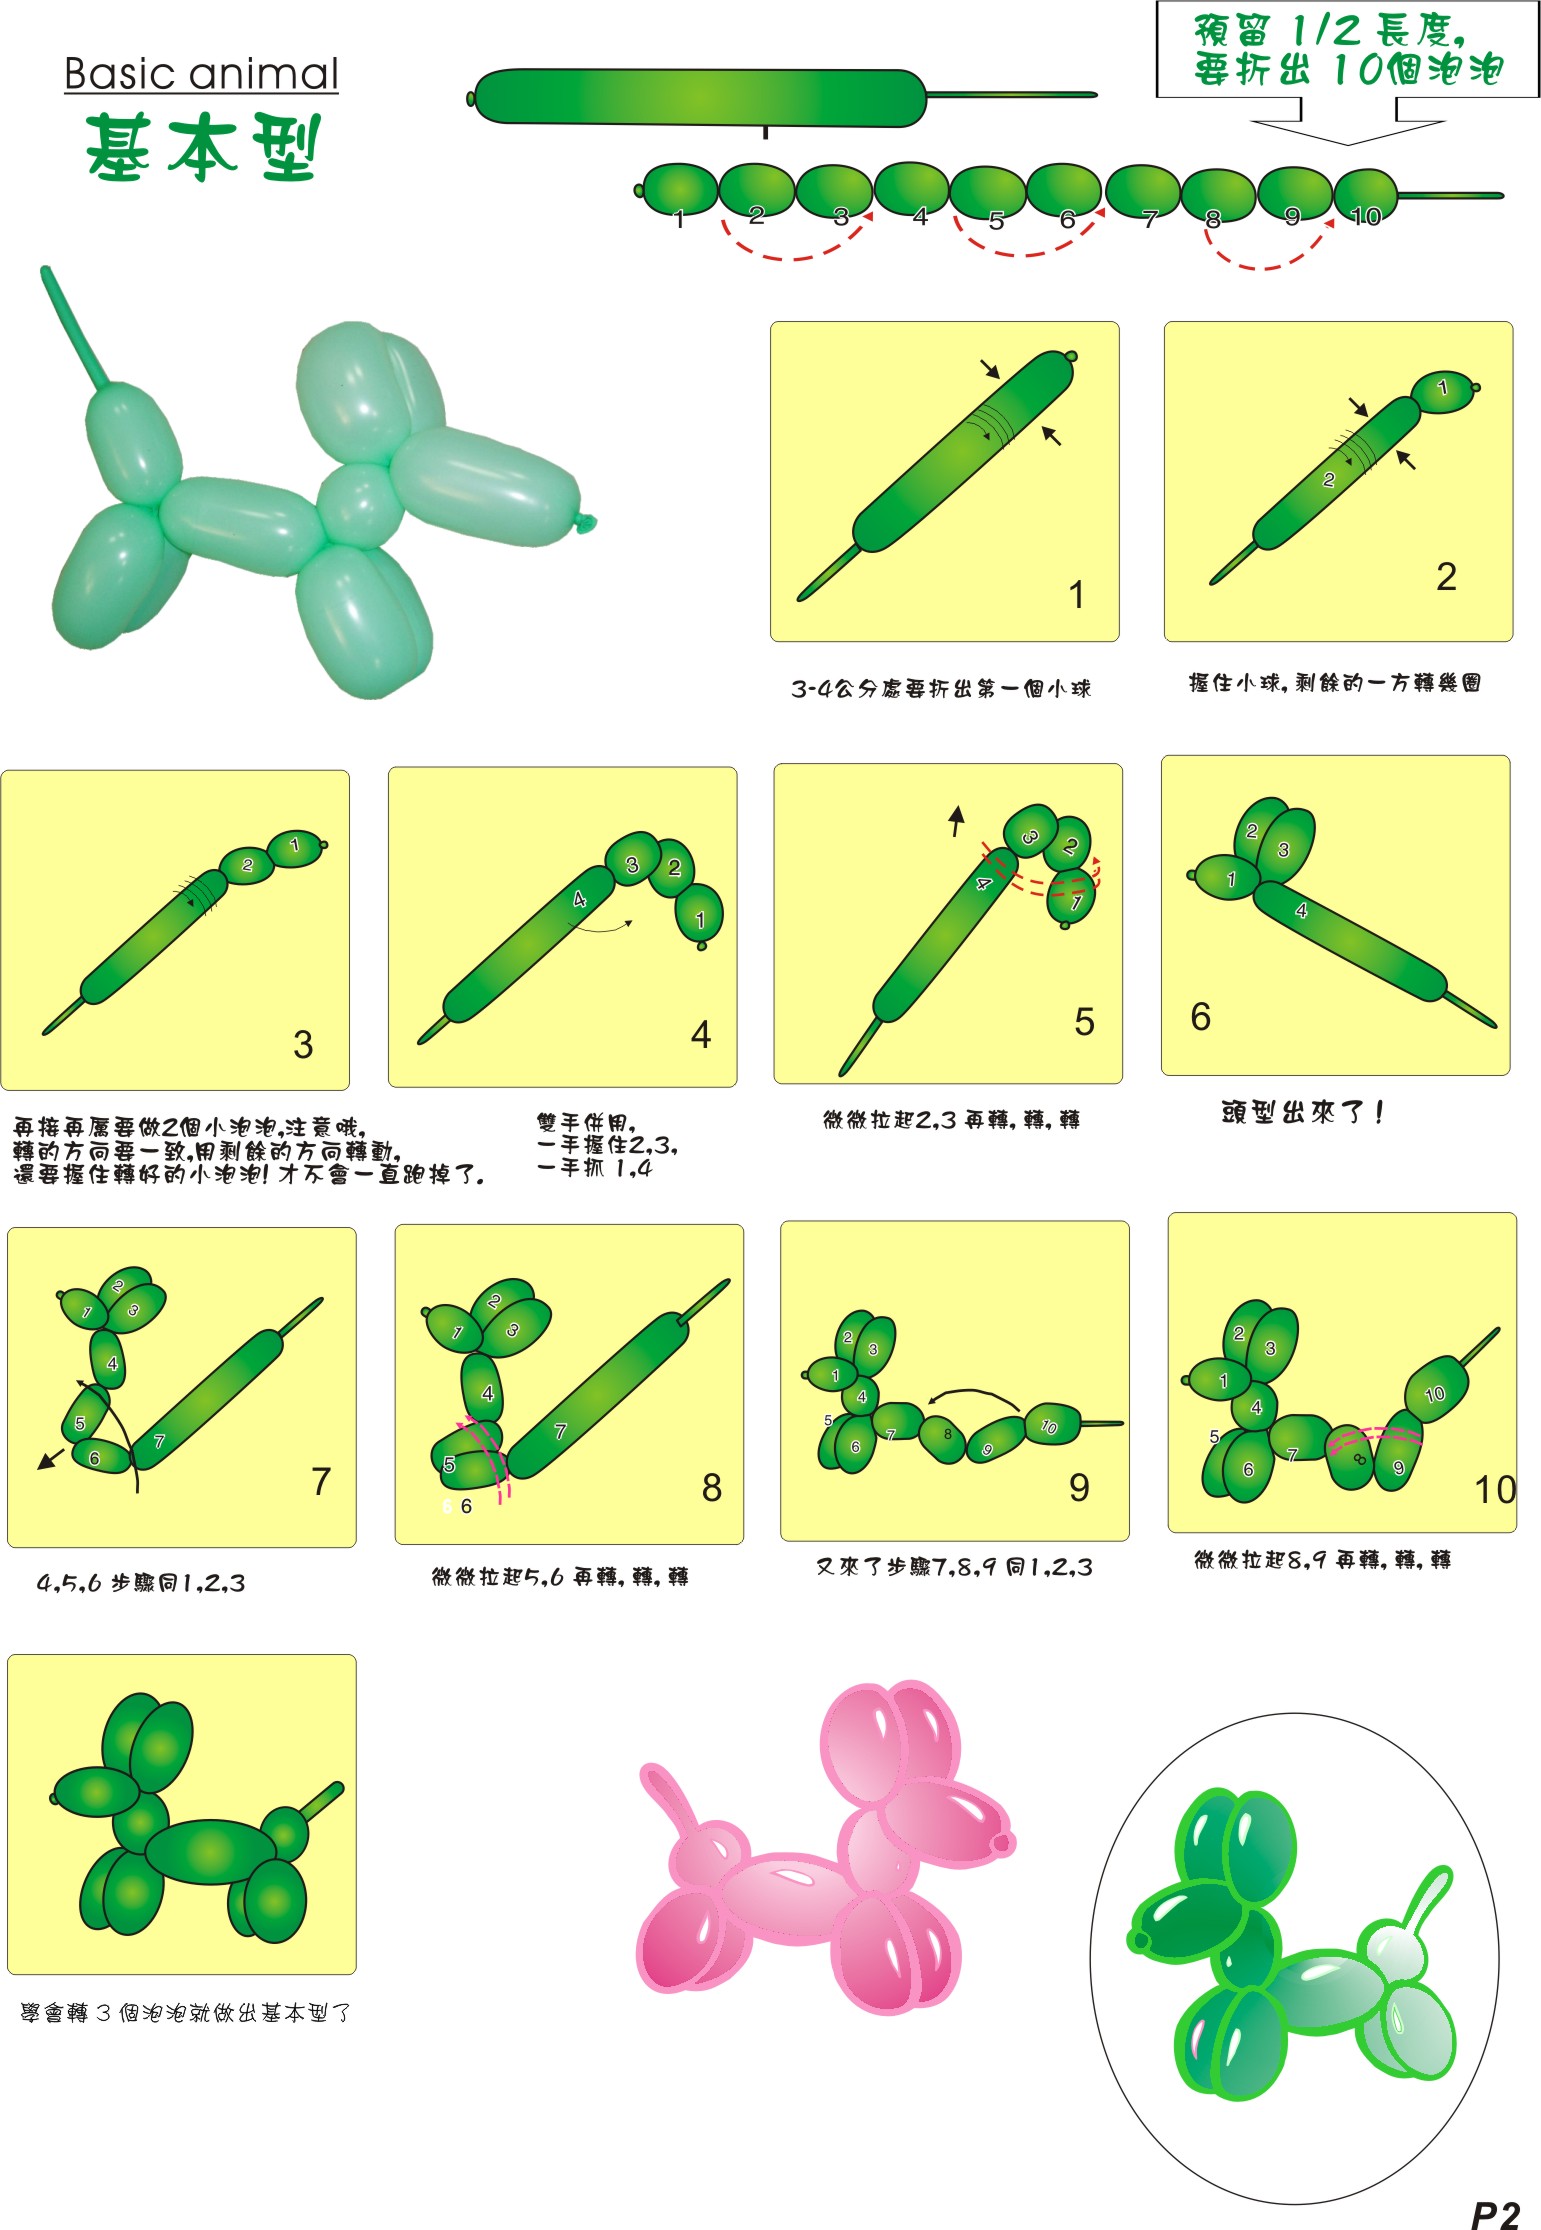 Balloon Animals Balloon And Pump Taiwantrade Com,How To Remove Ink Stains From Leather